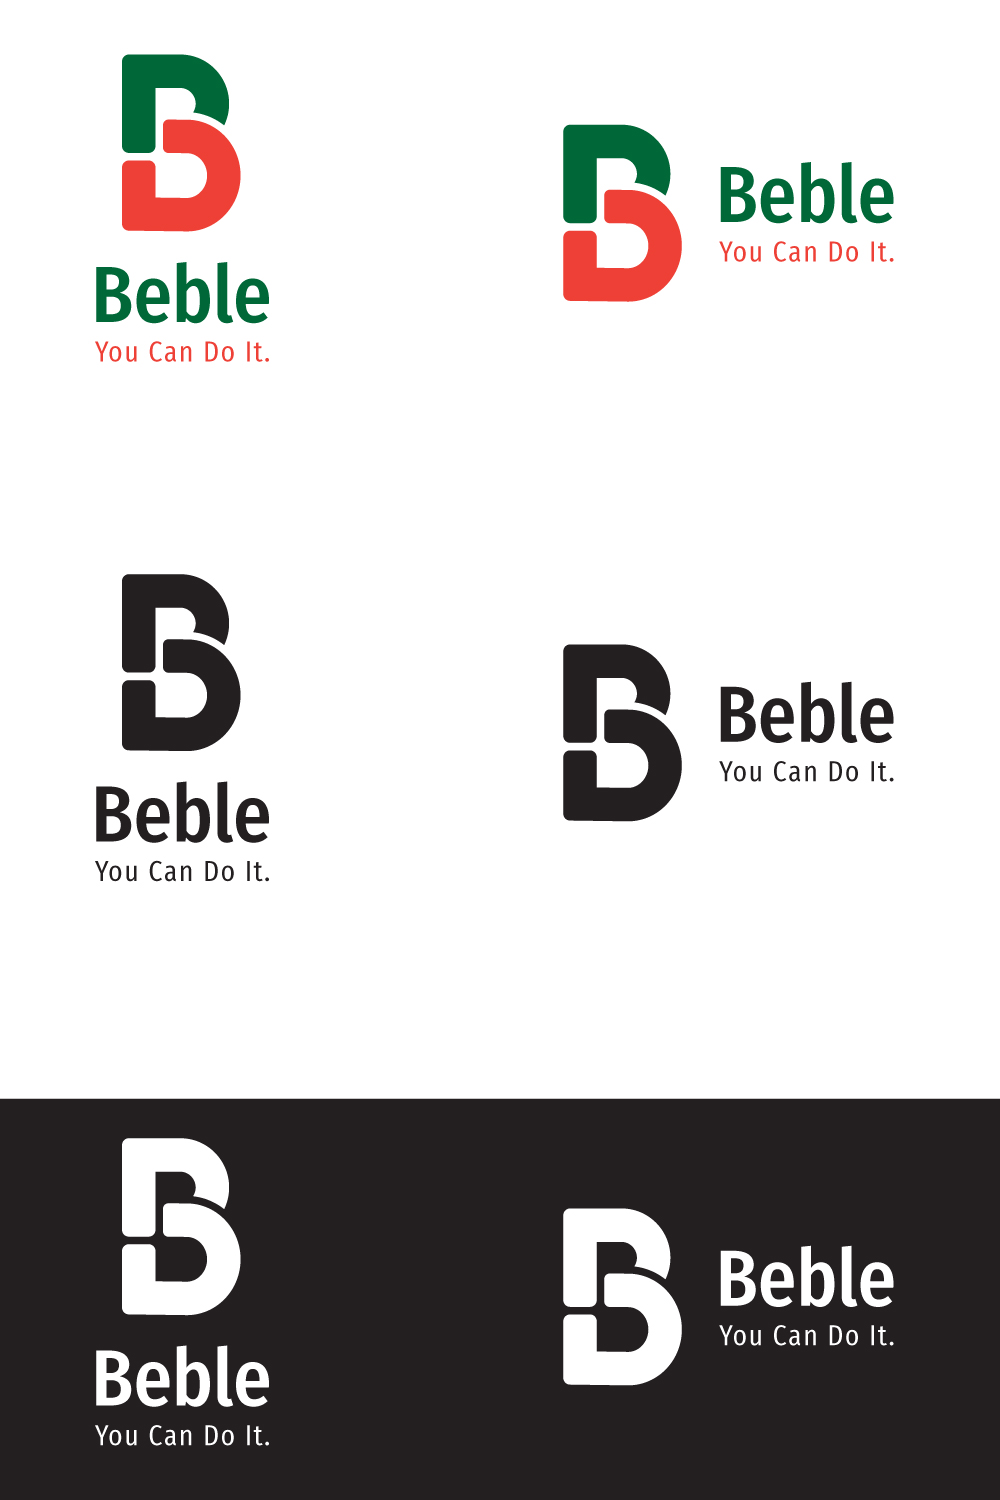 Series of logos designed to look like letters.